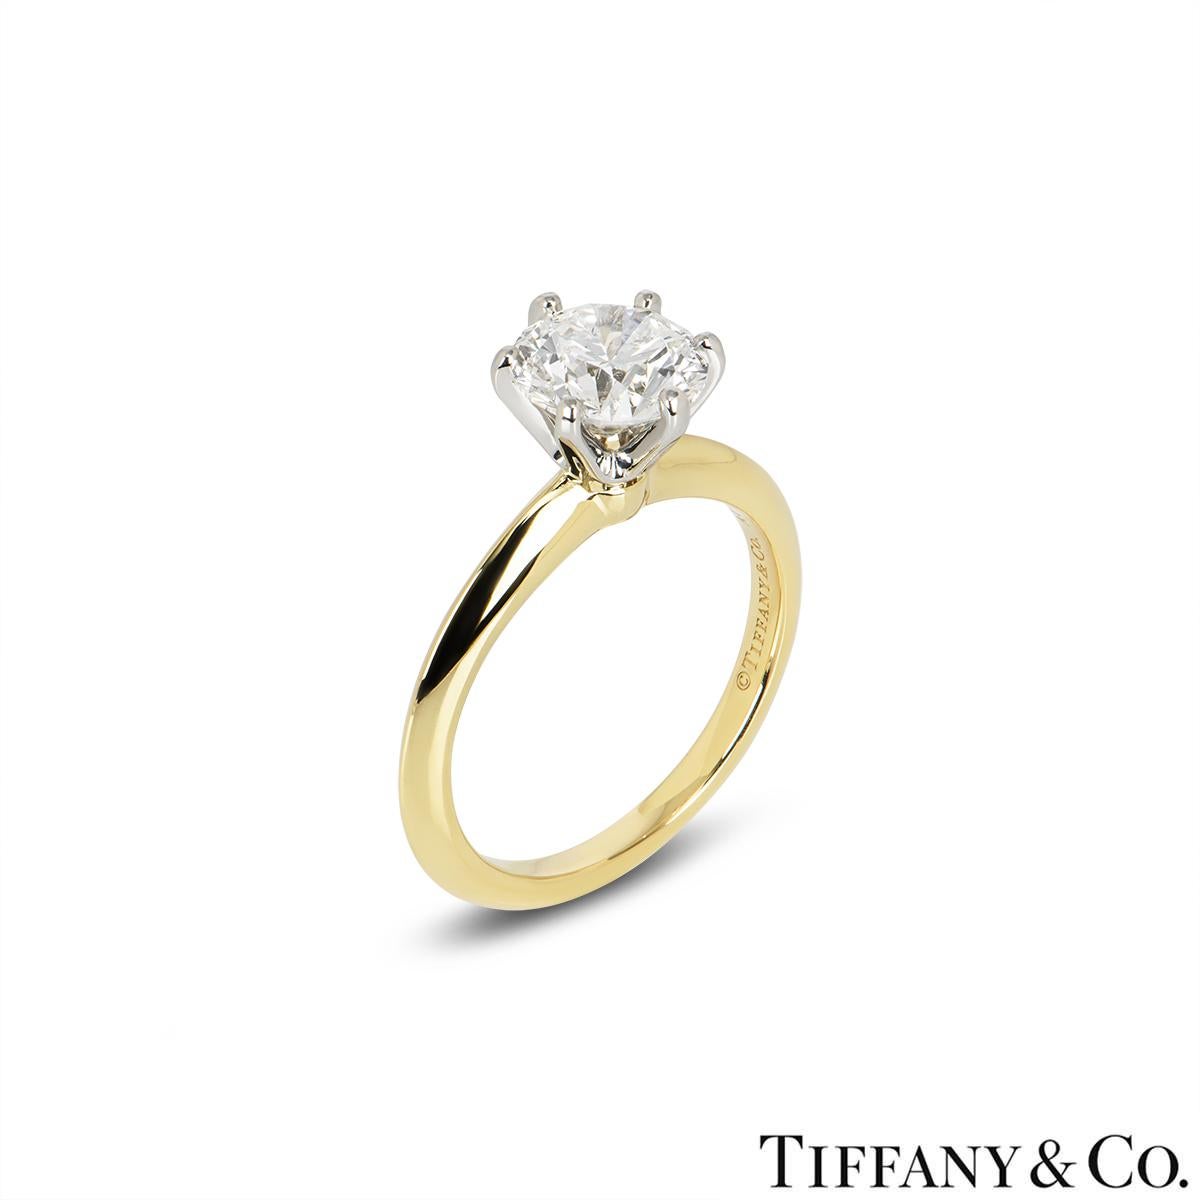 A stunning yellow gold diamond ring by Tiffany & Co. from the Setting collection. The ring comprises of a round brilliant cut diamond in a platinum six claw setting with a weight of 1.67ct, G colour and VVS1 clarity. The diamond scores an excellent